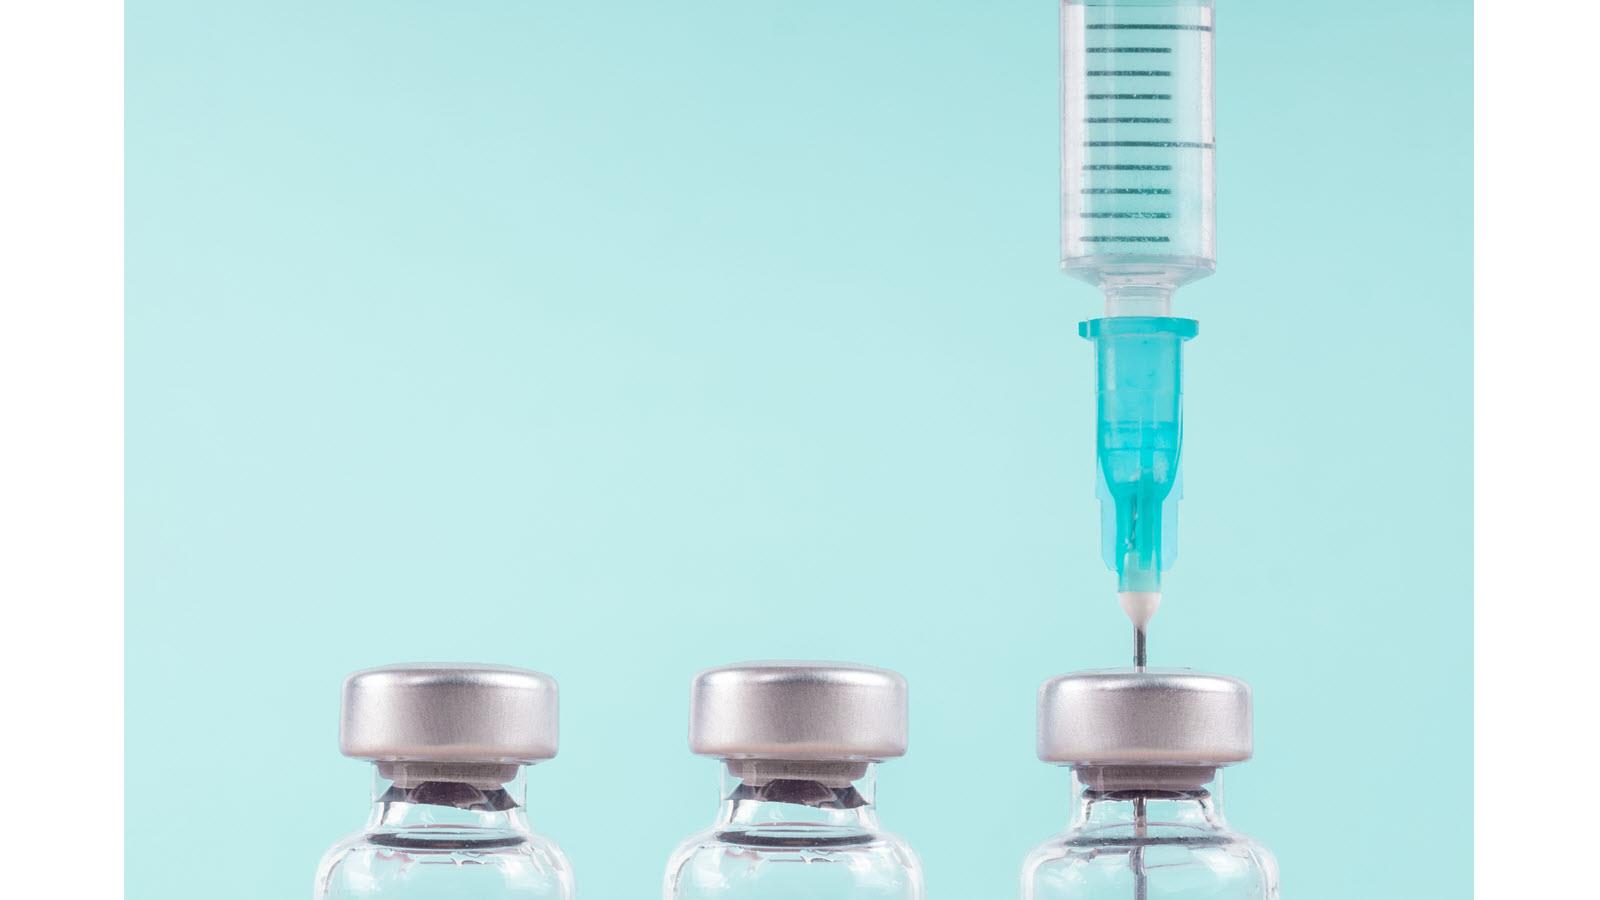 flu vaccine syringe going into a bottle on a blue background